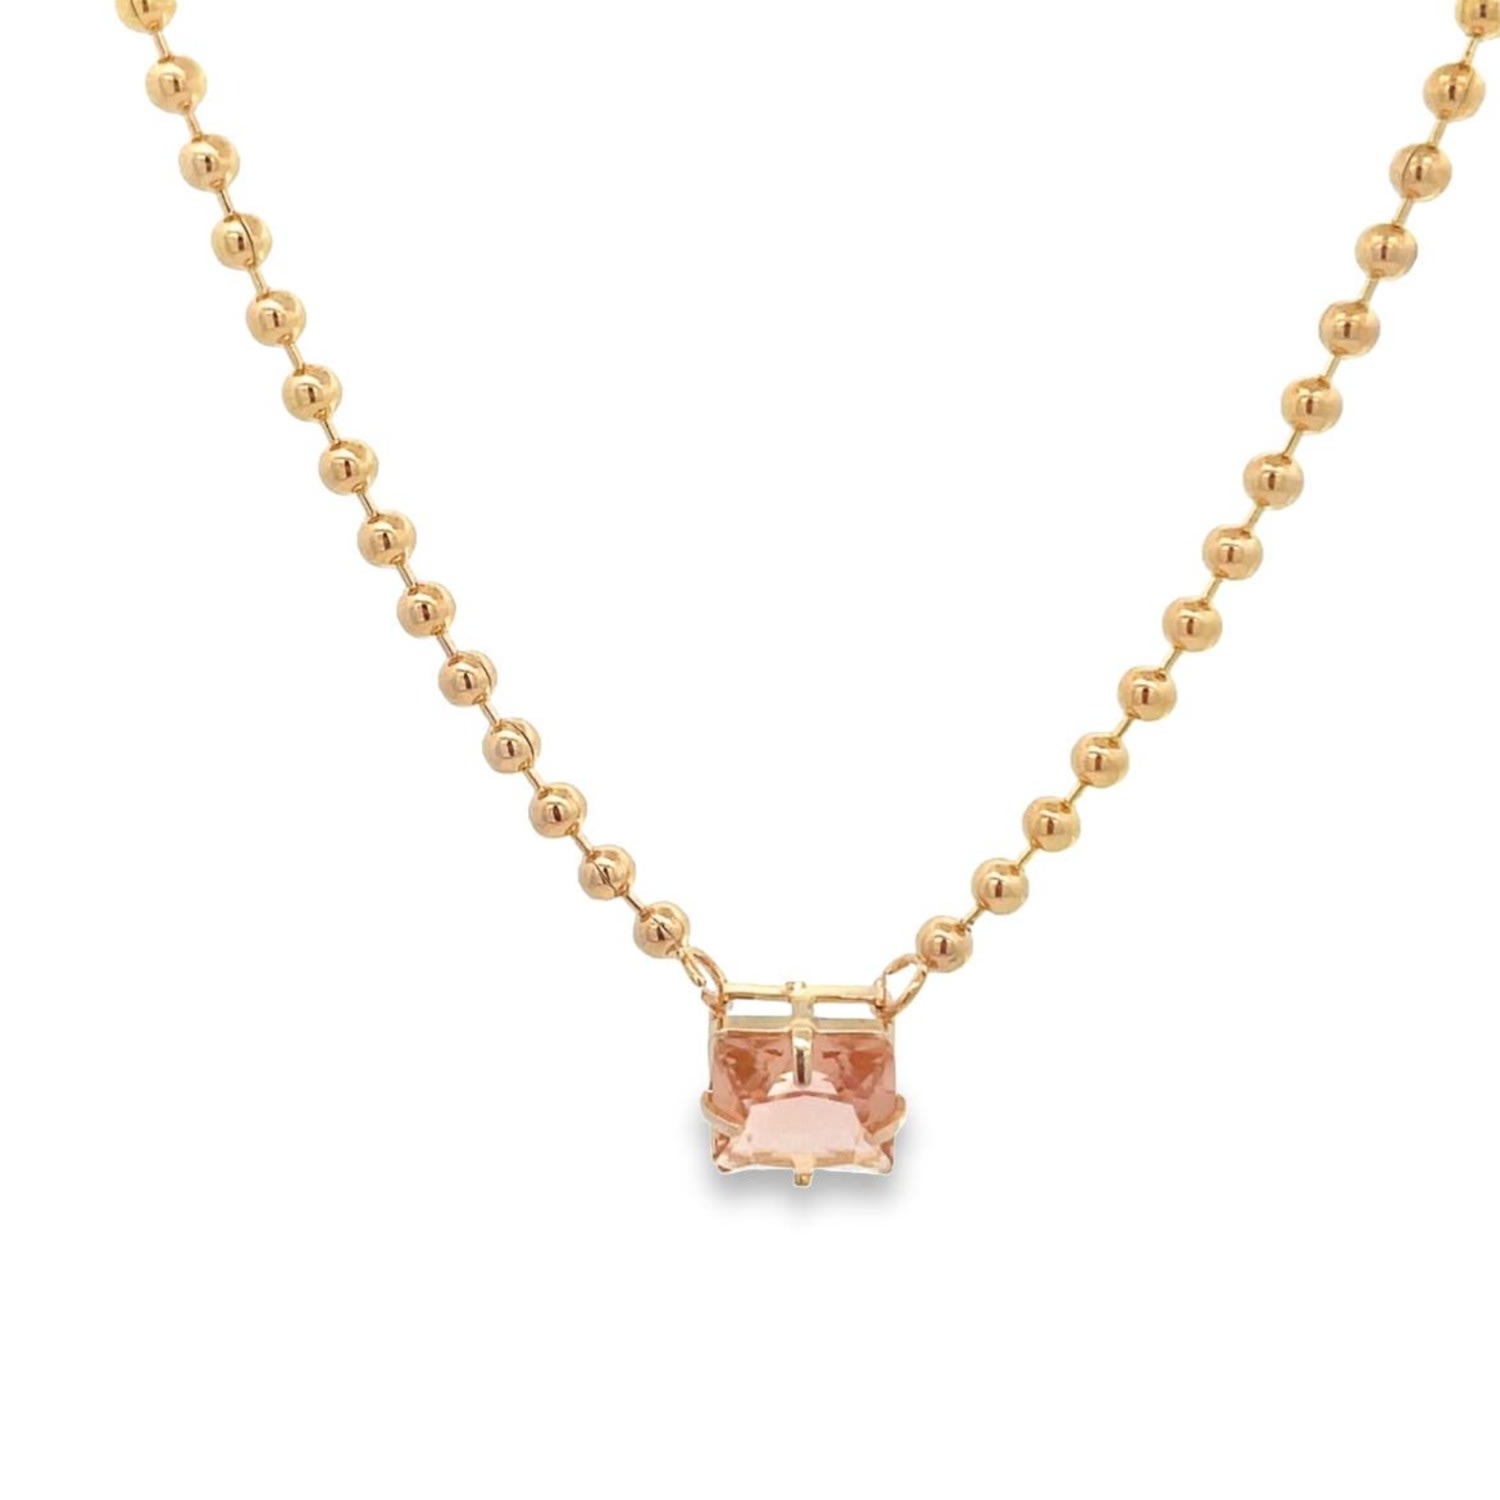 Shymi Women's Pink / Purple / Gold Beaded Ball Gem Necklace - Pink Square